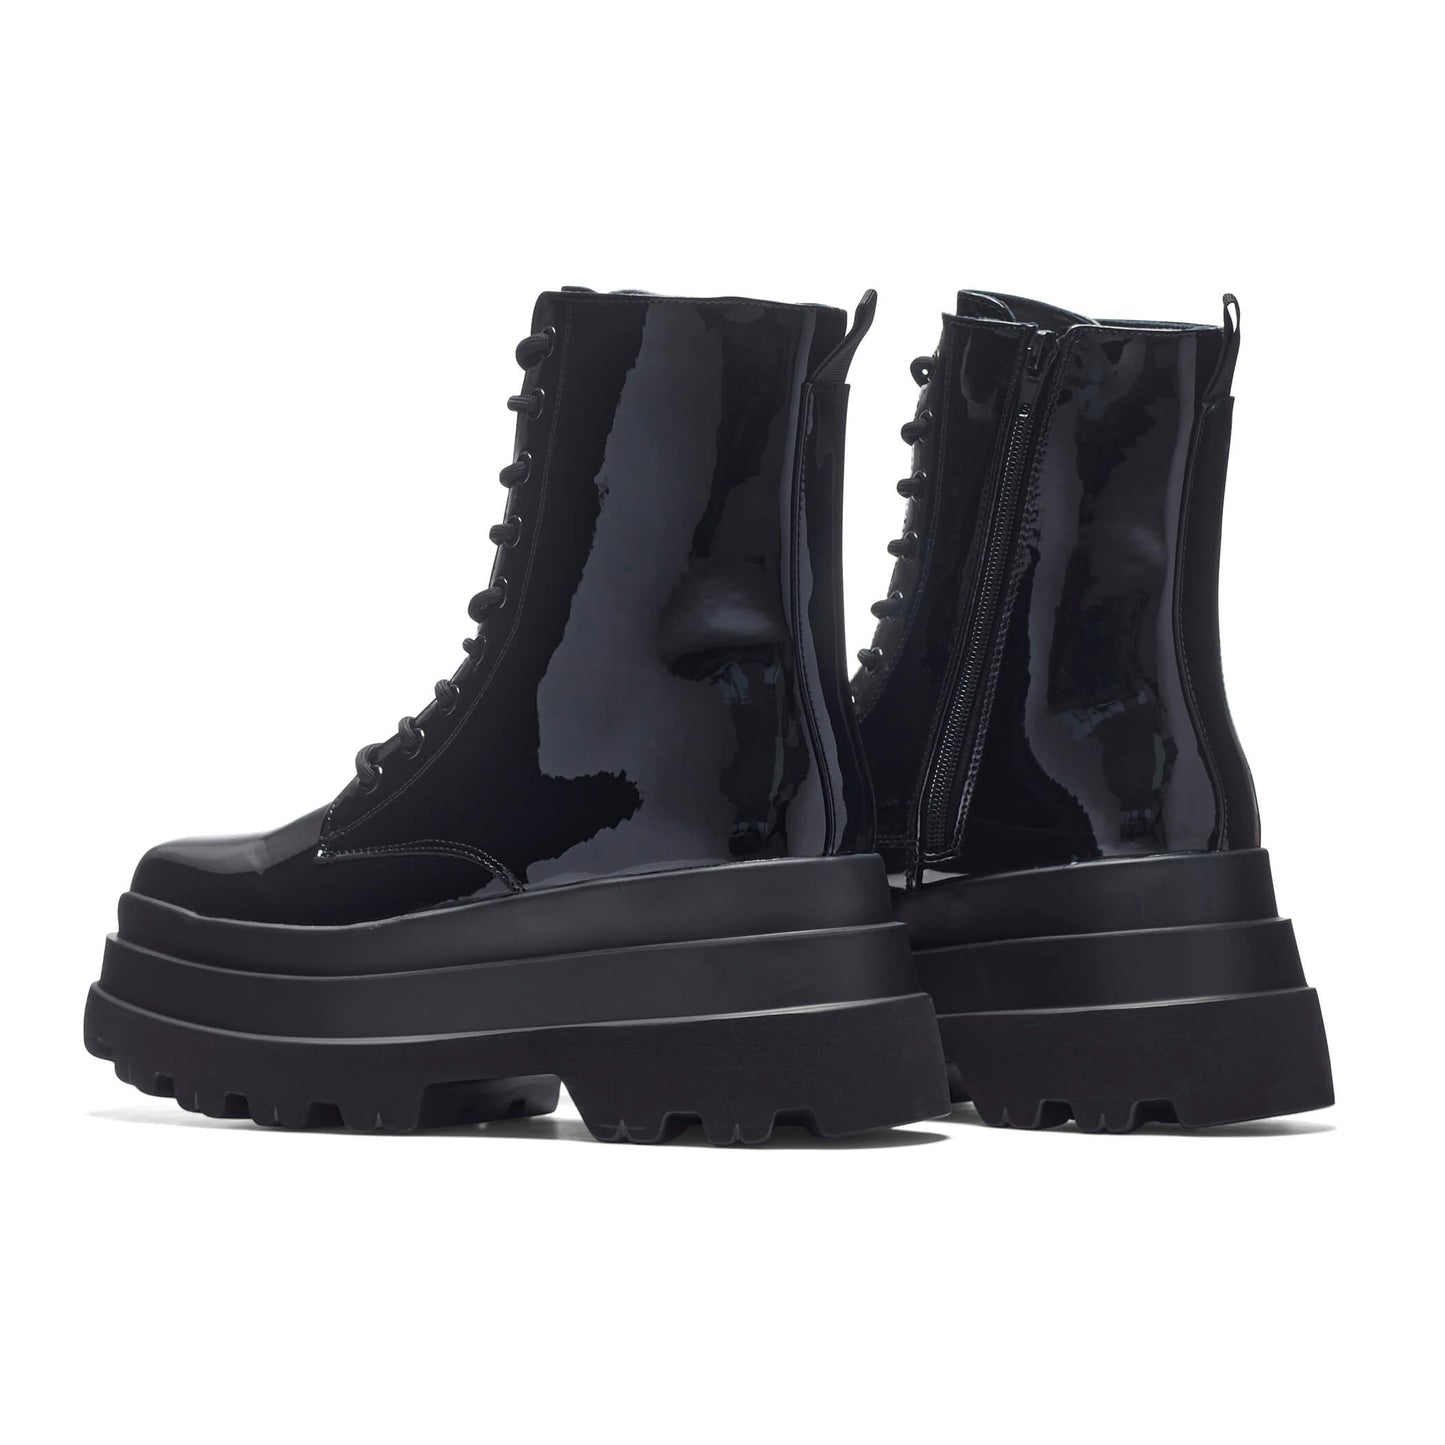 Deathwatch Trident Patent Platform Boots - Ankle Boots - KOI Footwear - Black - Back Side View